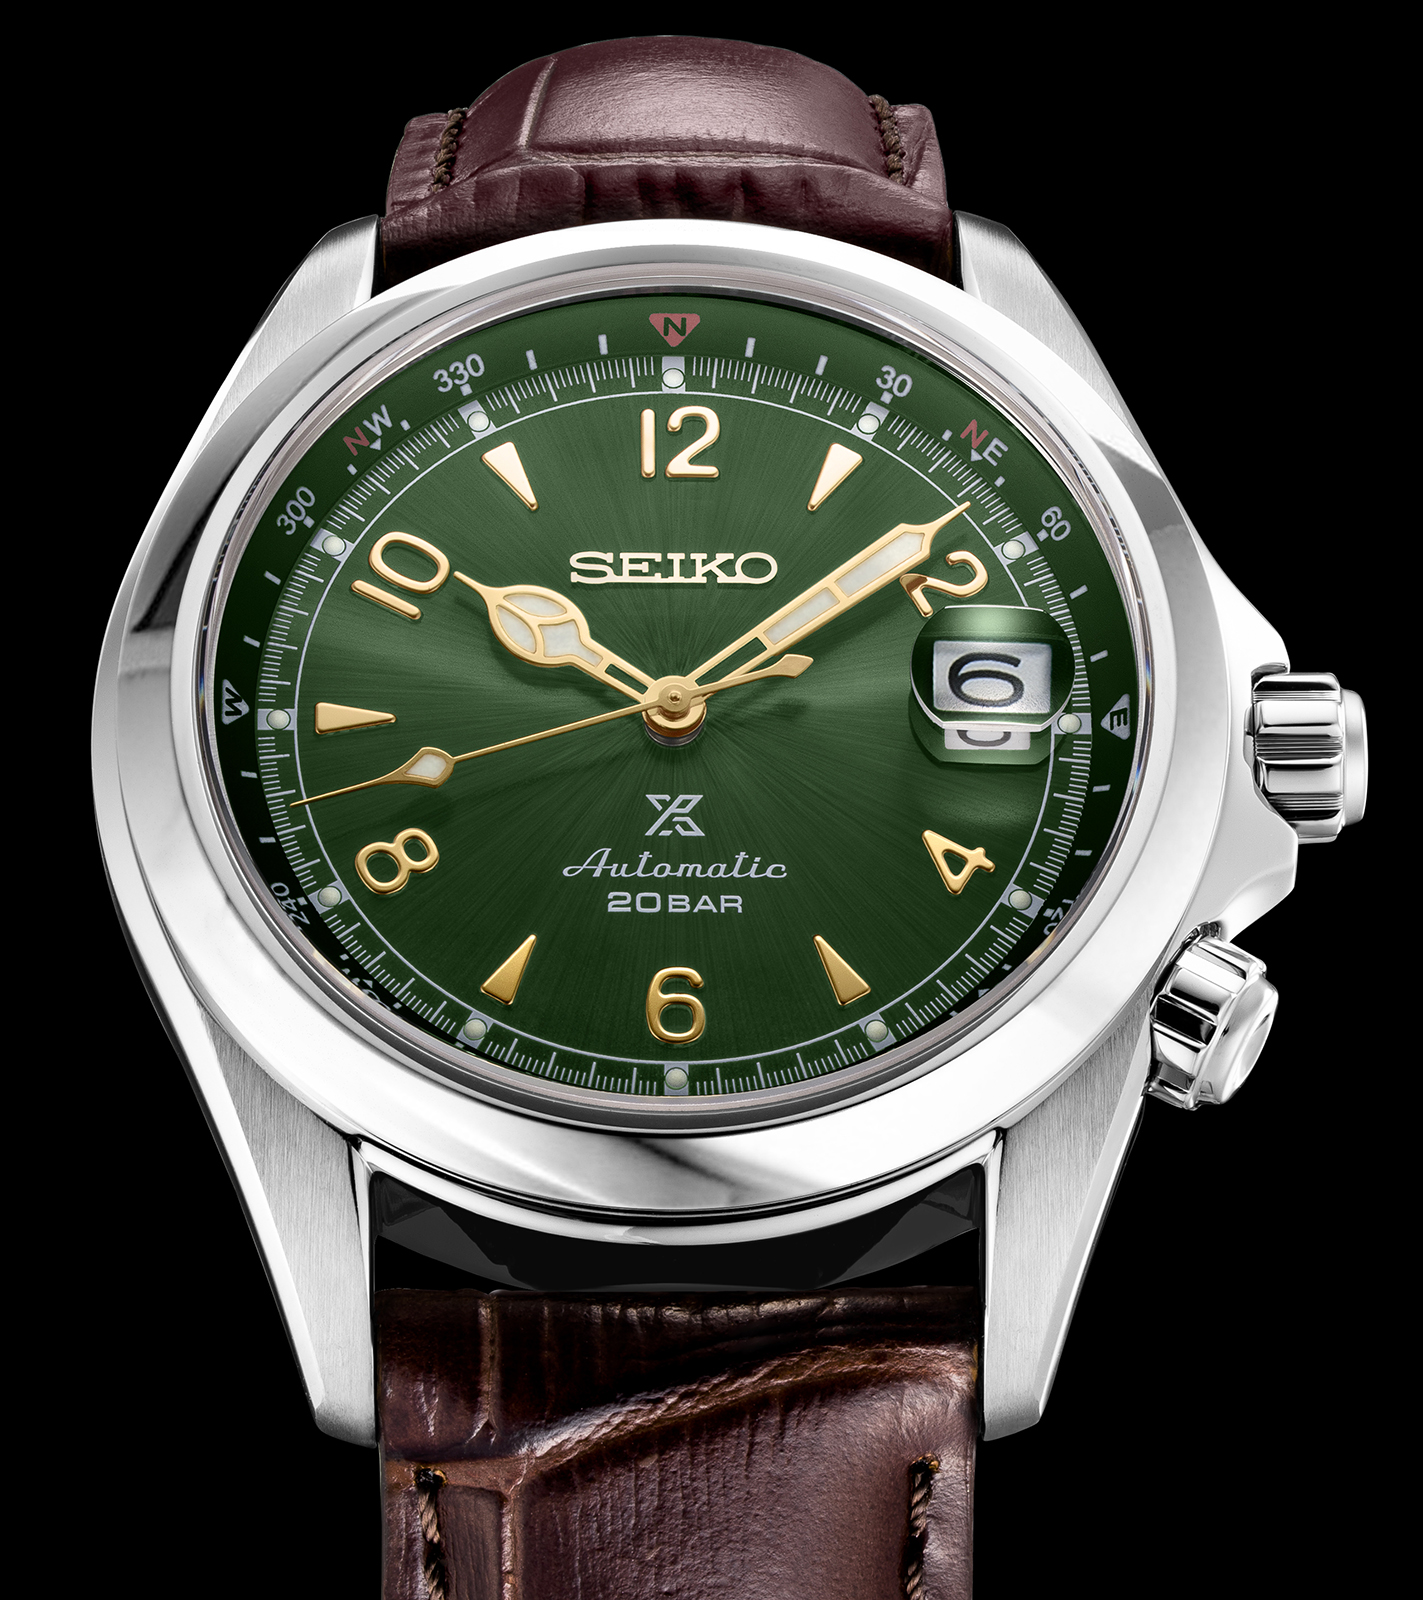 Upcoming Seiko on Sale, UP TO 62% OFF | www.apmusicales.com